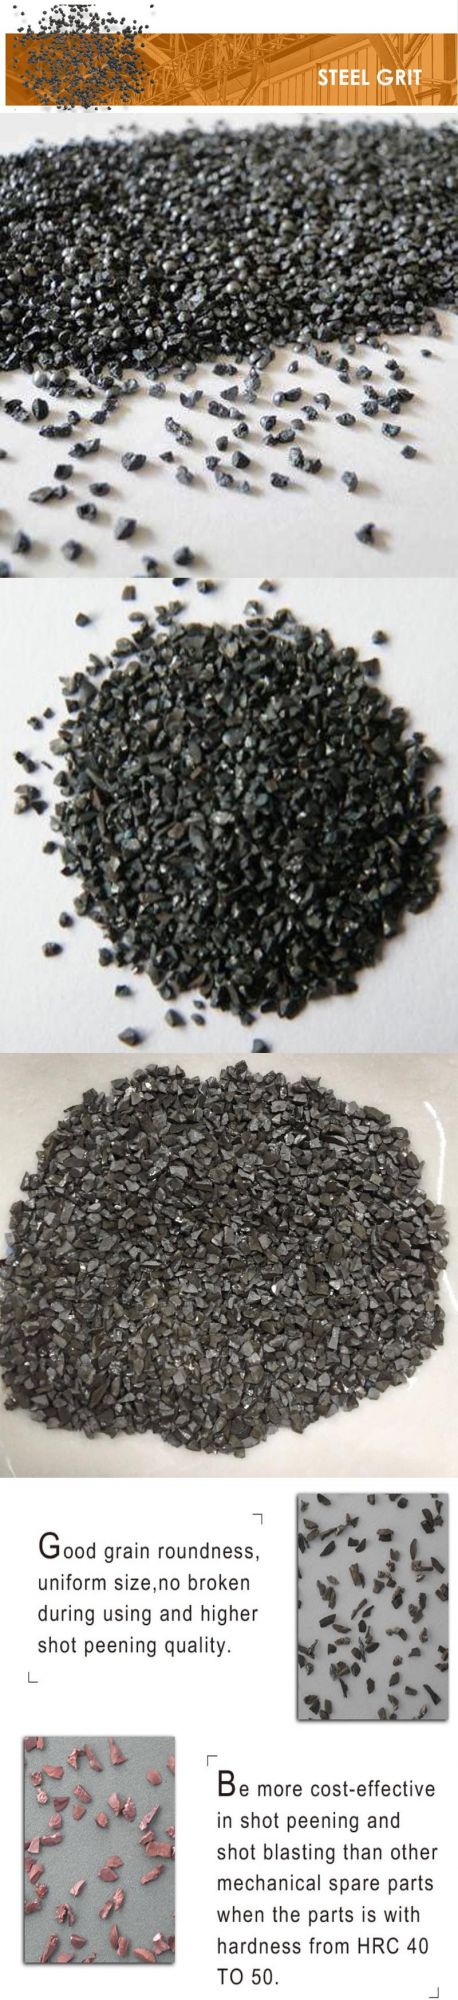 High Efficient Cast Steel Grit G80 for Surface Treatment